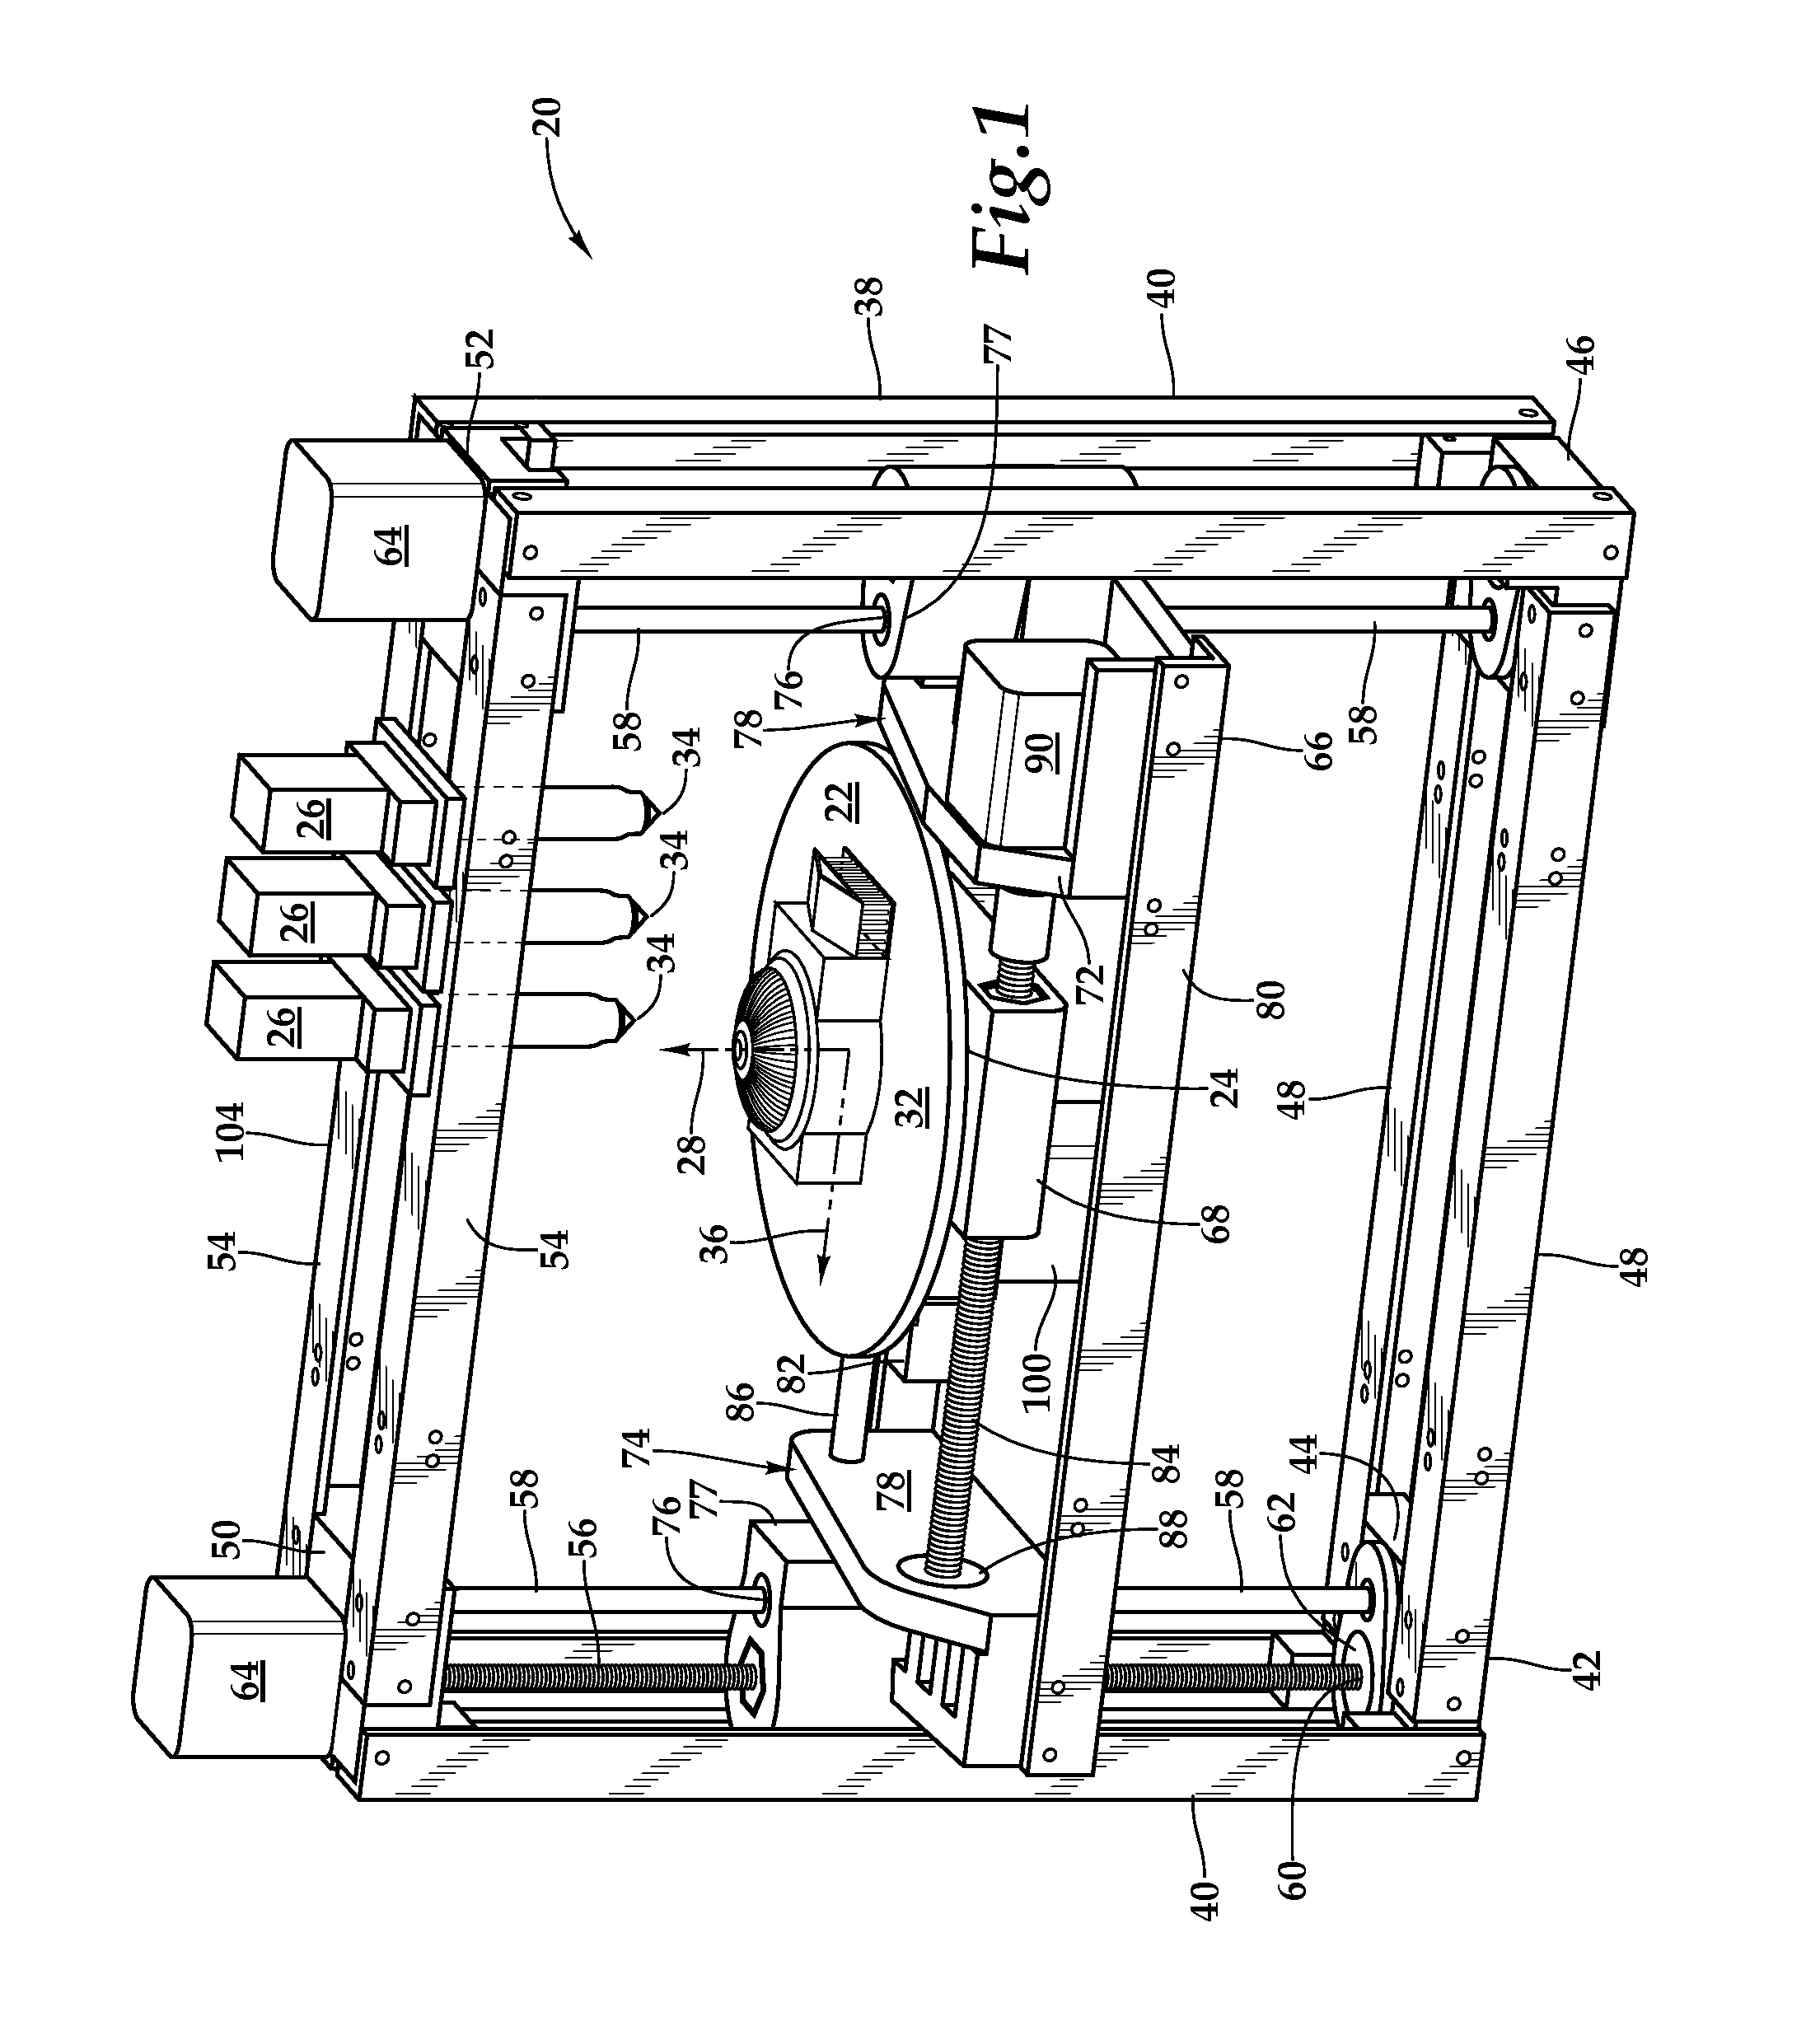 Fixed Printhead Fused Filament Fabrication Printer and Method